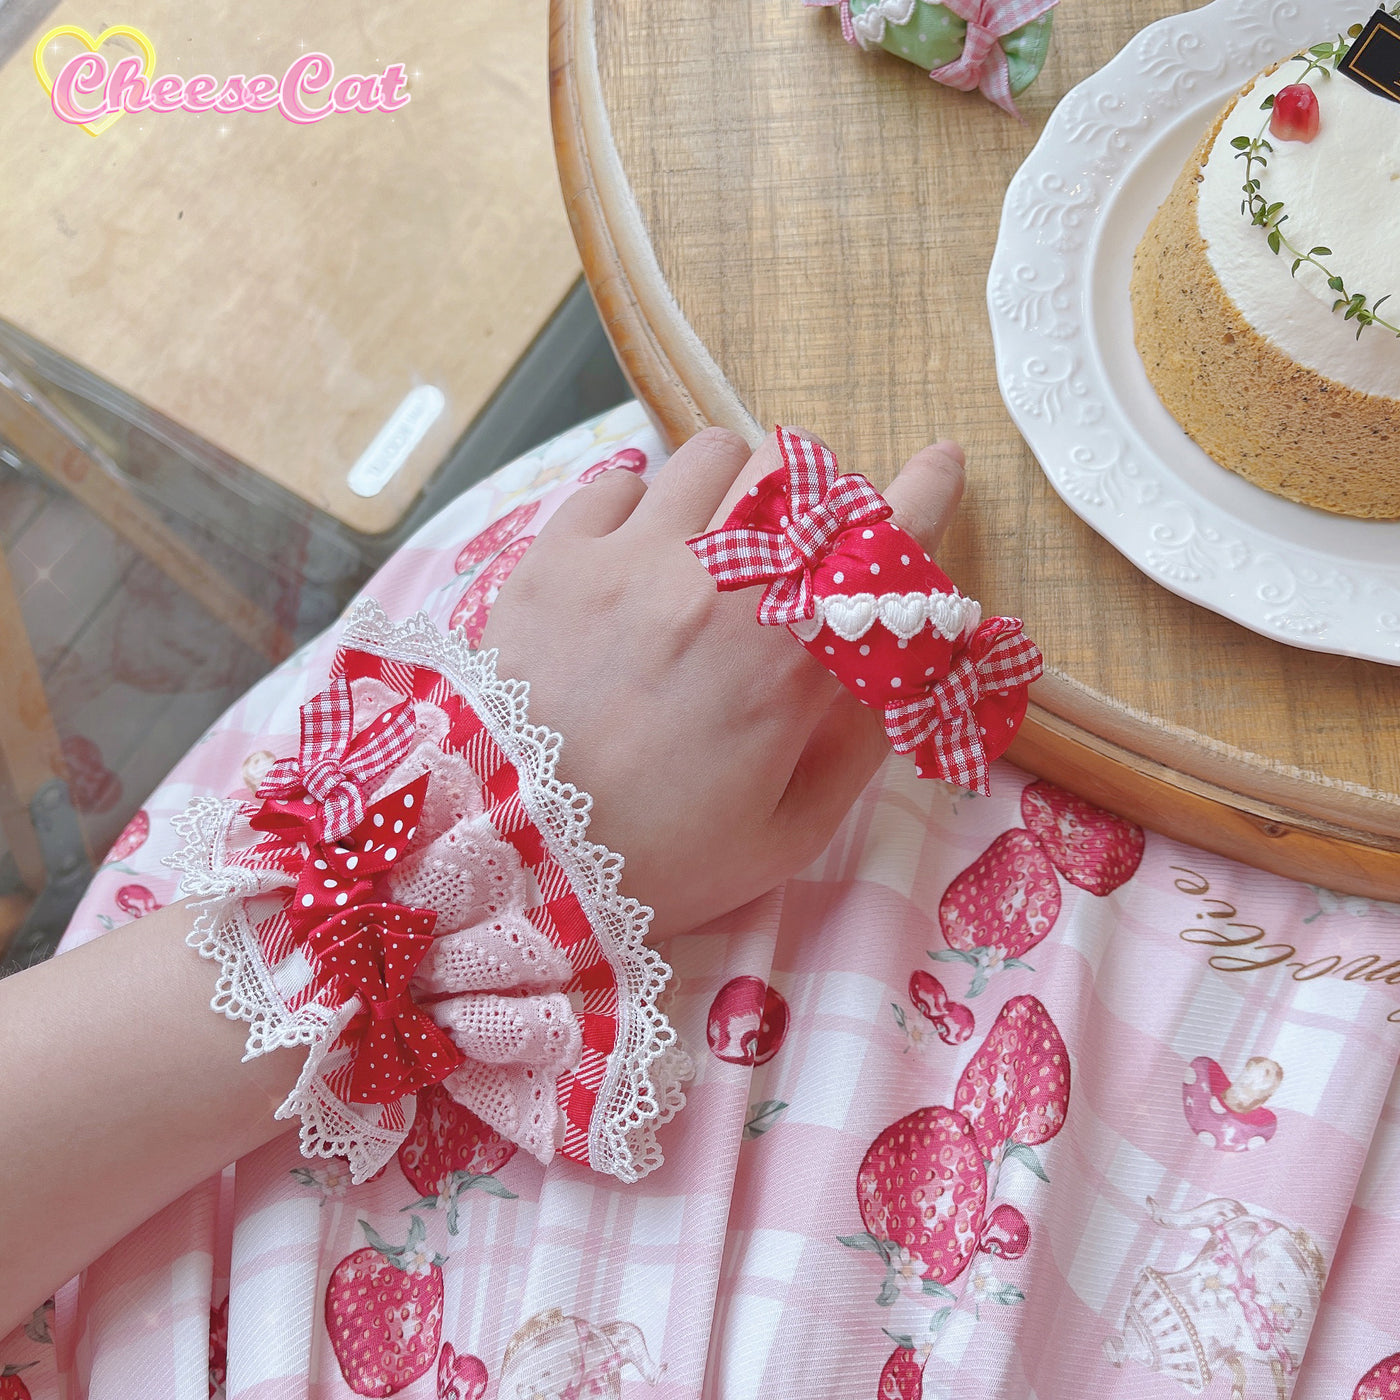 (Buyforme)Cheese Cat~Sweet and Playful Strawberry Gingham Lace Cuffs   